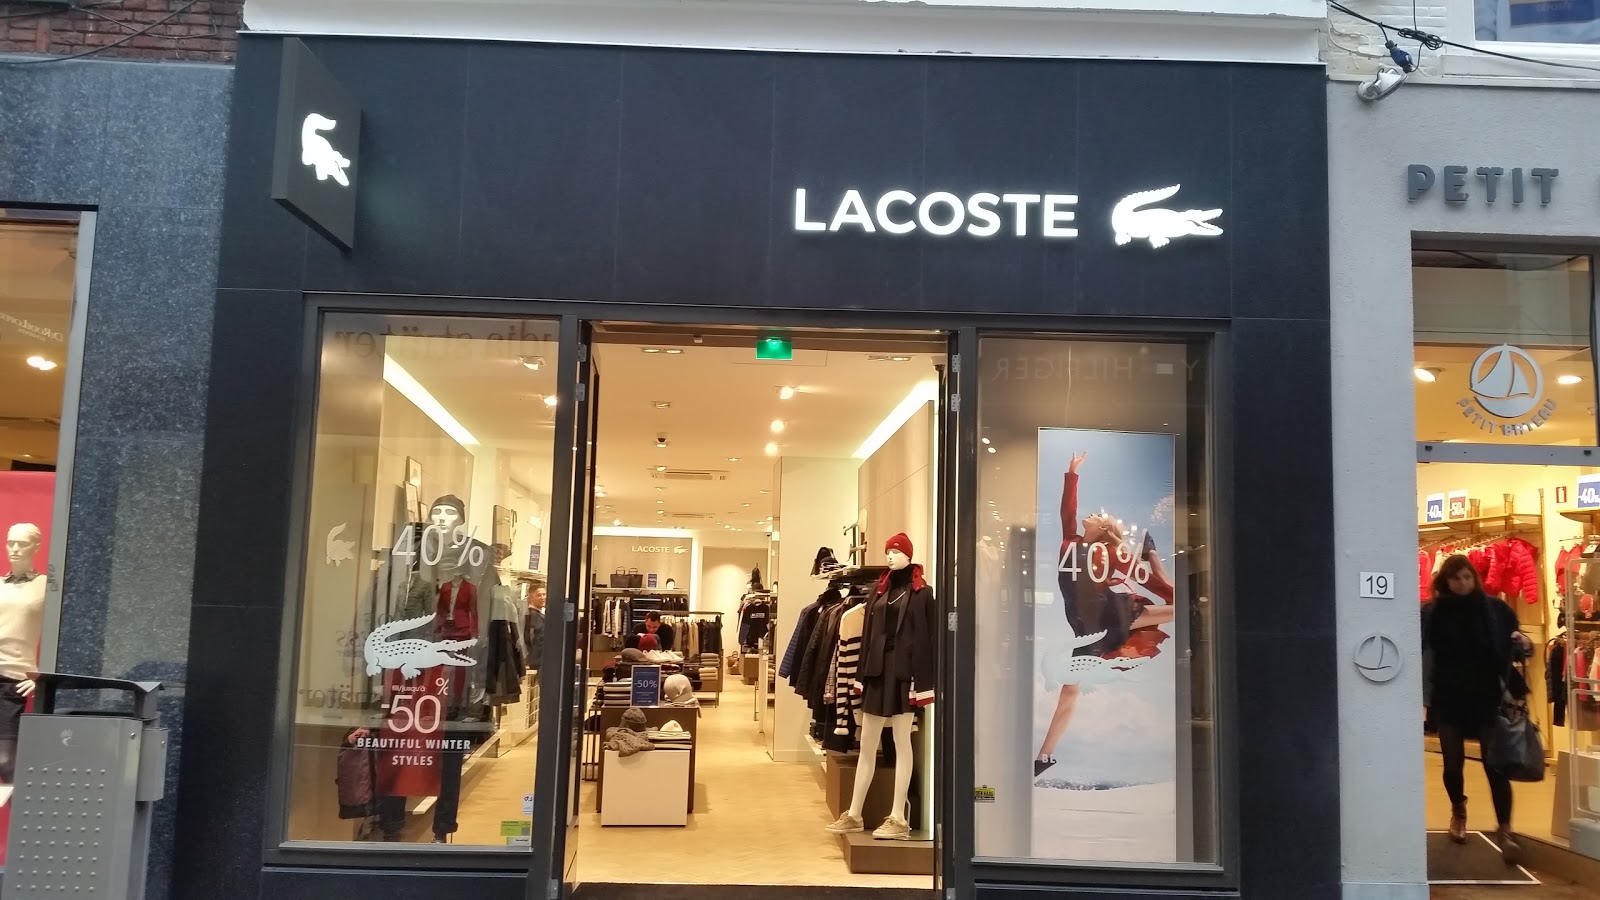 Boutique Lacoste Den-Haag accepteert American Express Credit Cards